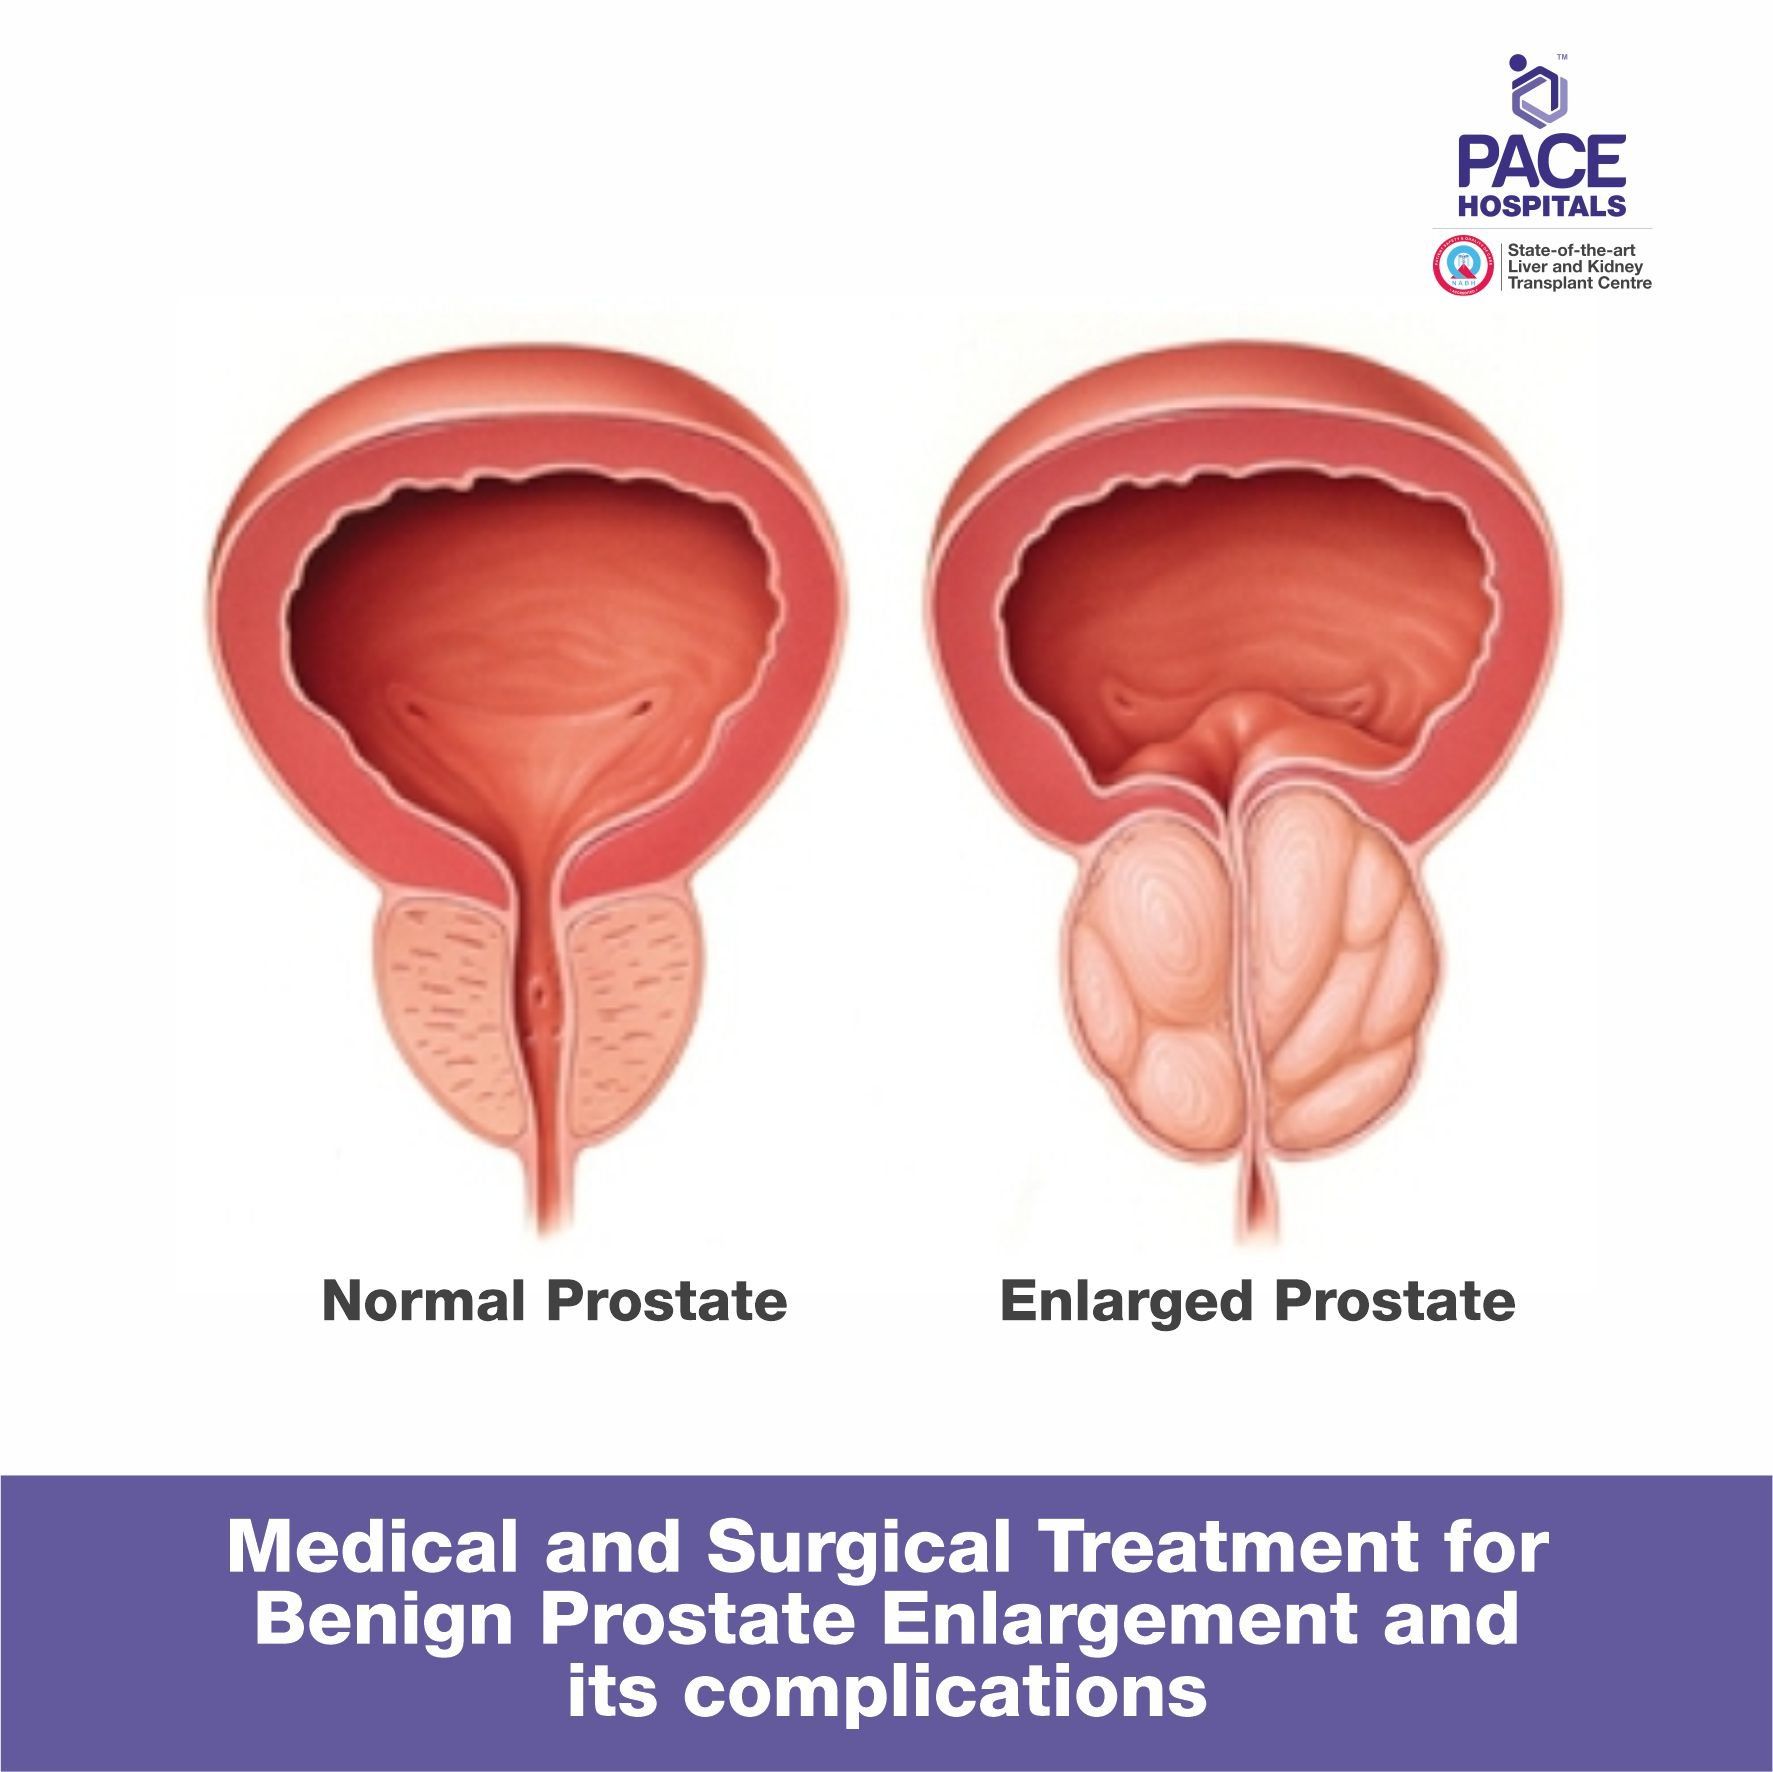 Medical and Surgical Treatment for Benign Prostate Enlargement and its complications